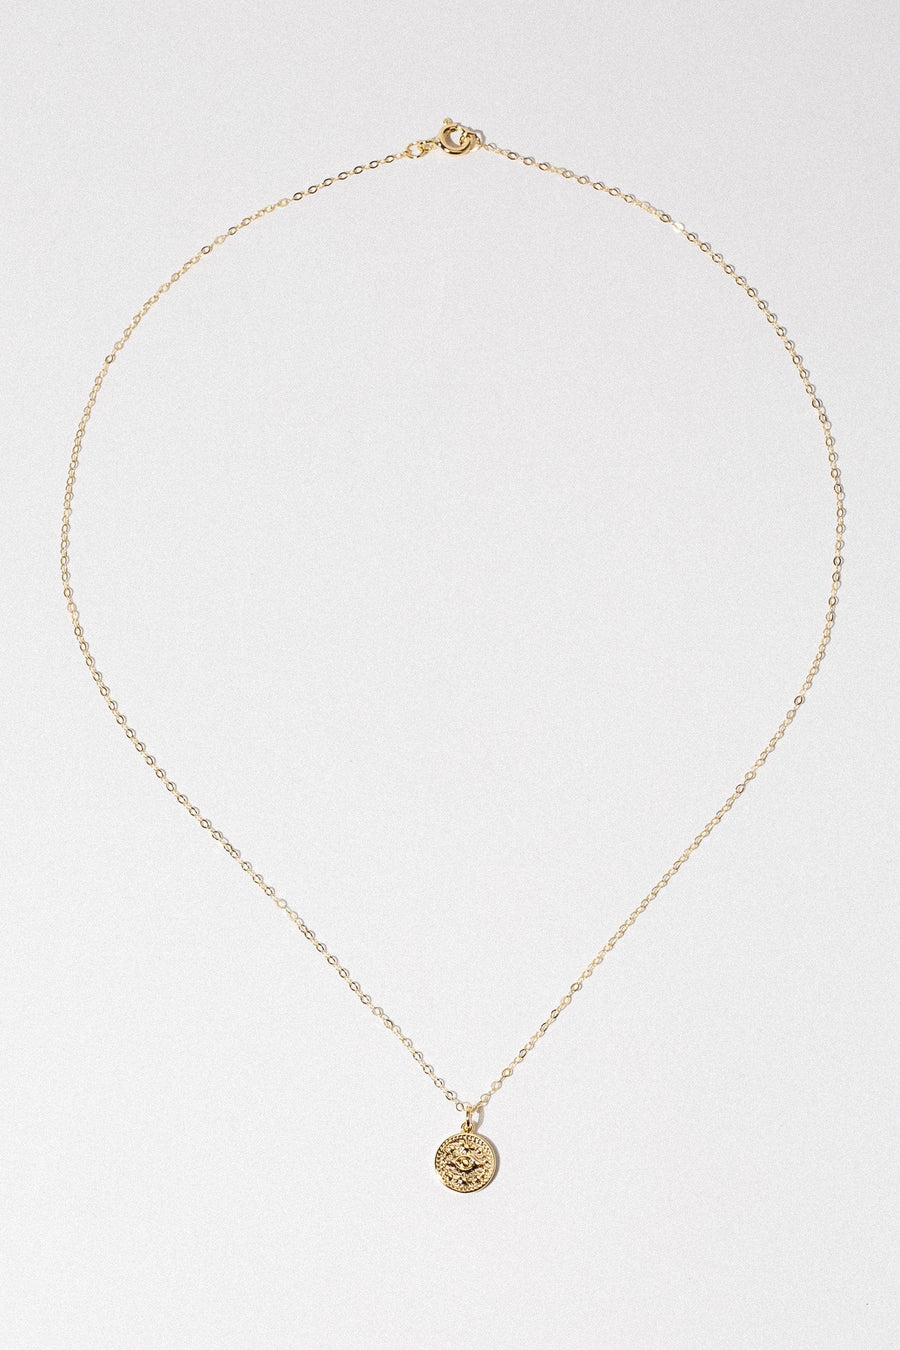 Aimvogue Jewelry Gold / 16 Inches Delicate Protection Necklace